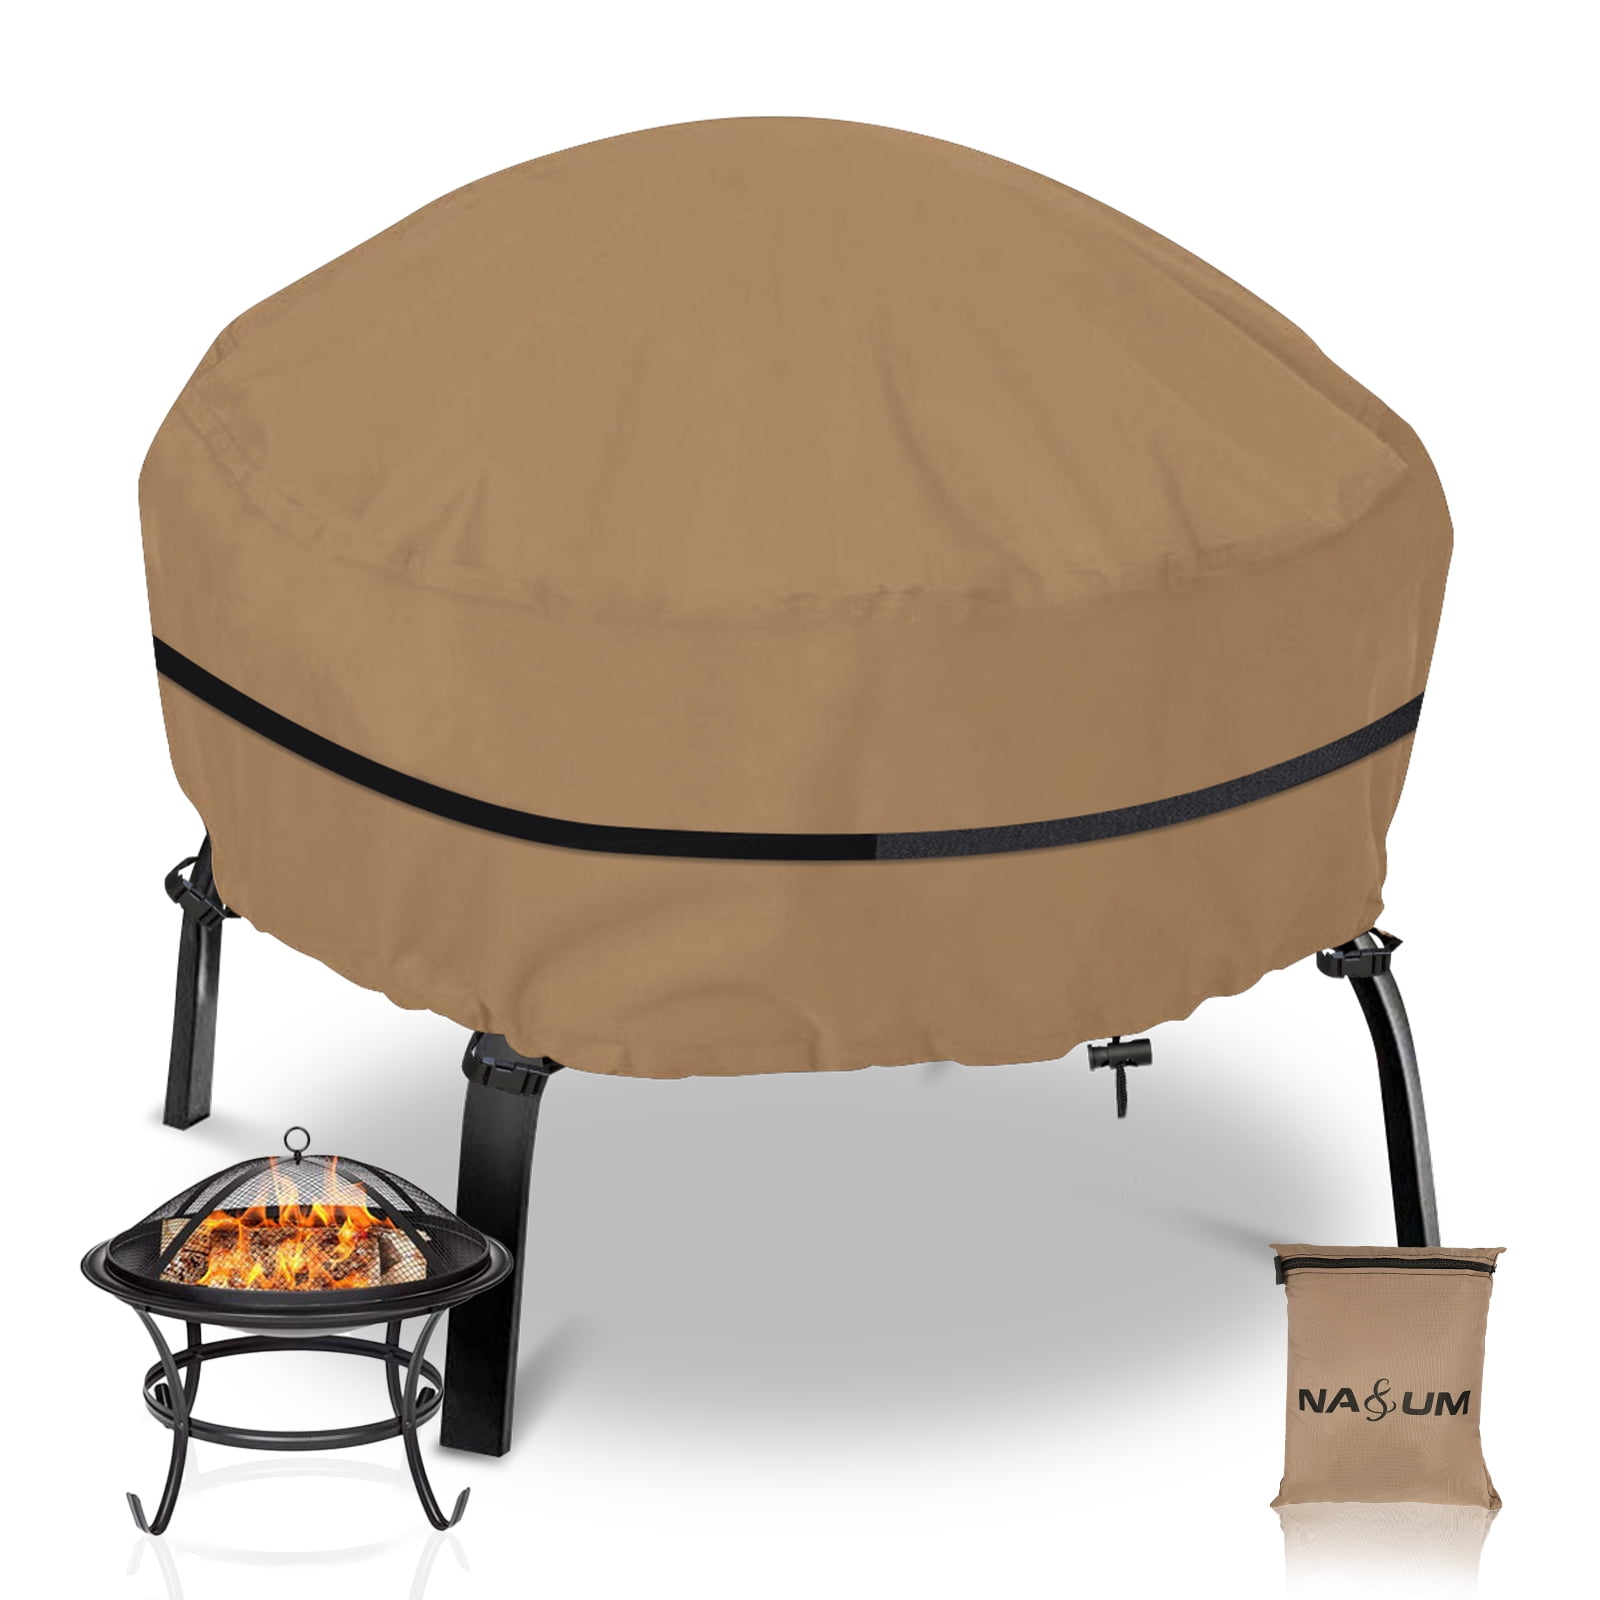 Black Patio Fire Pit Cover Round Waterproof fits for 38 inch 420D Heavy Duty Fabric Outdoor Patio Fire Pit Cover with Thick PU Coating